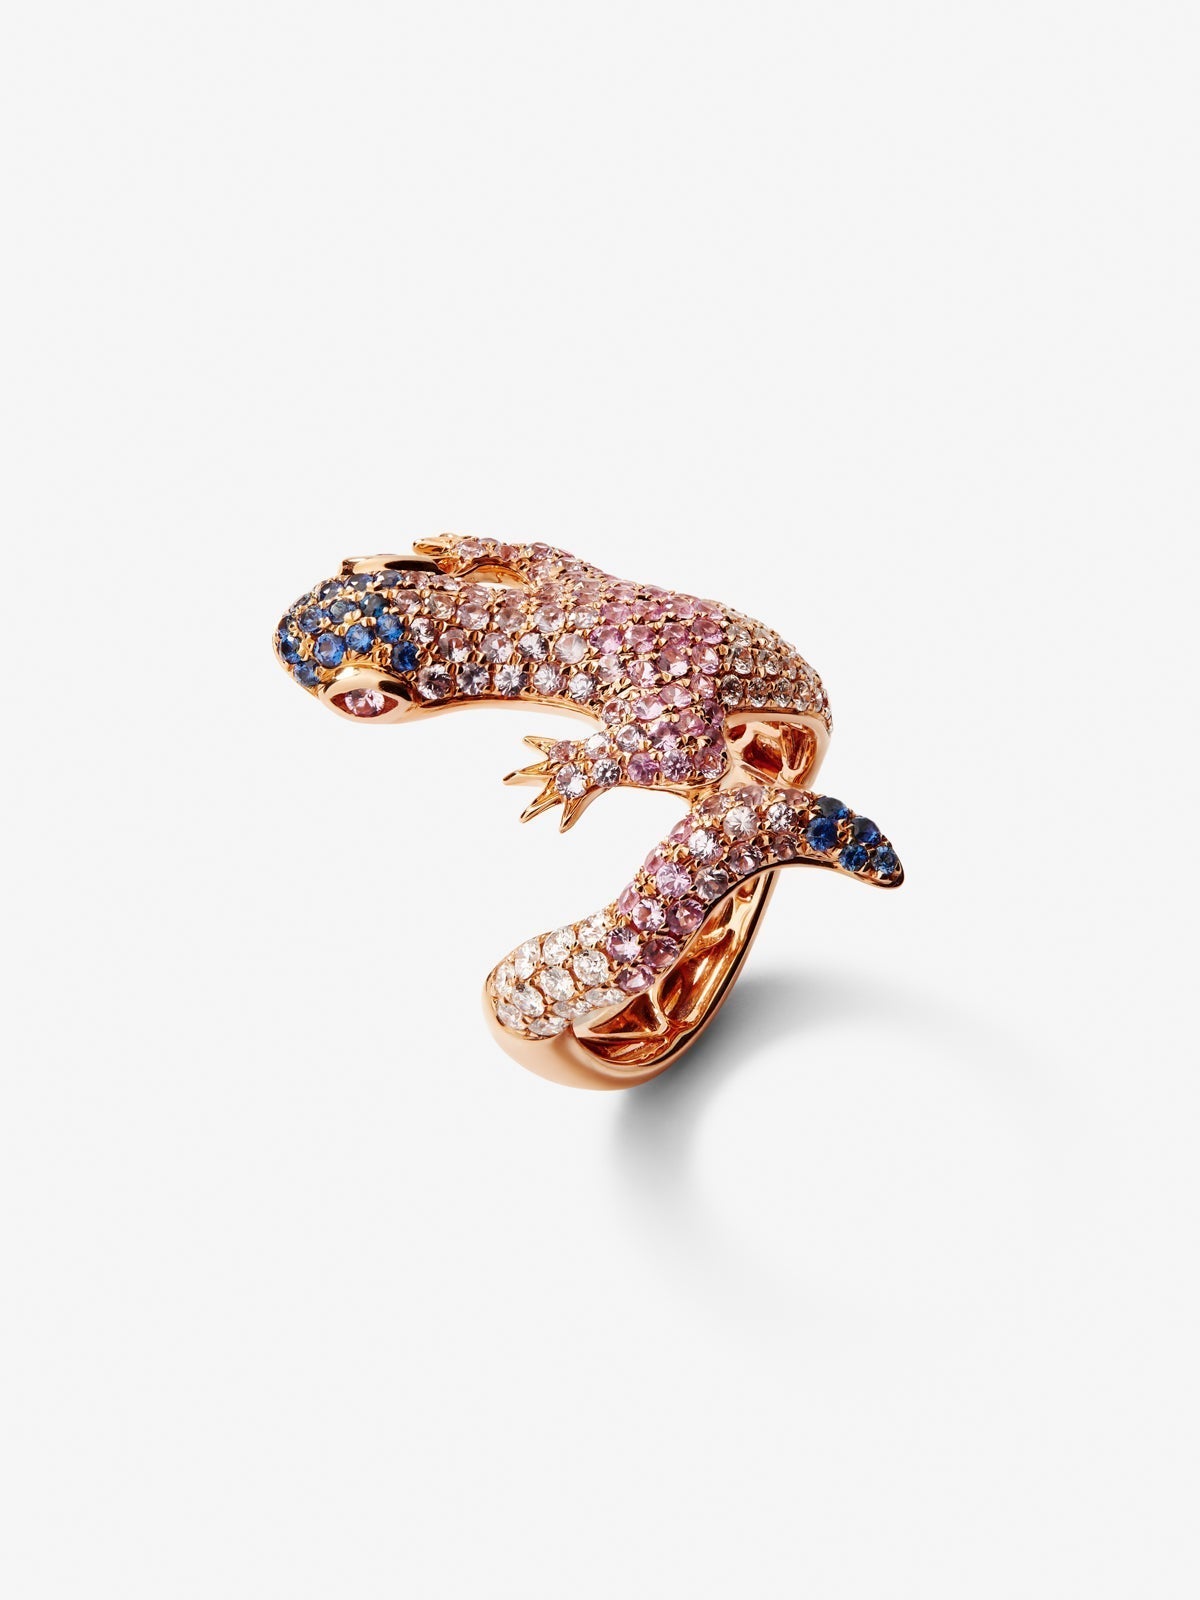 18K rose gold ring with 20 brilliant-cut diamonds with a total of 3.3 cts and 160 multicolored sapphires with a total of 2.69 cts in the shape of a salamander